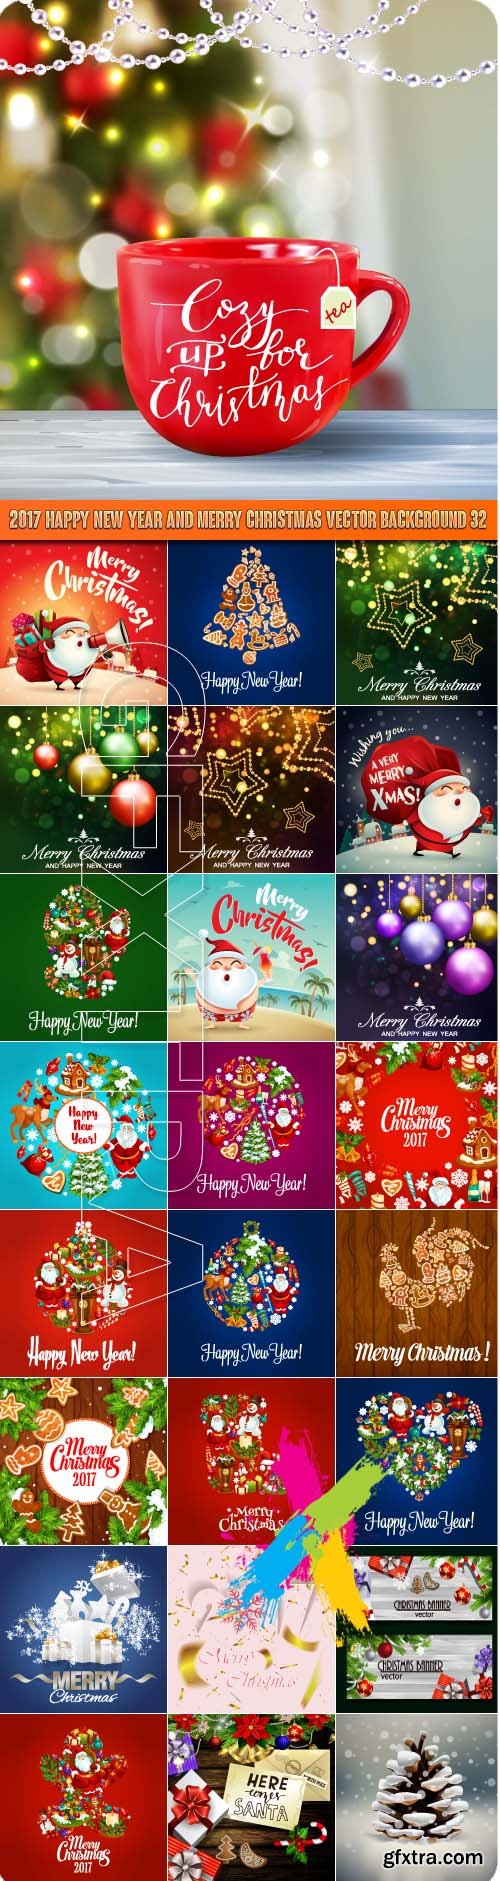 2017 Happy New Year and Merry Christmas vector background 32